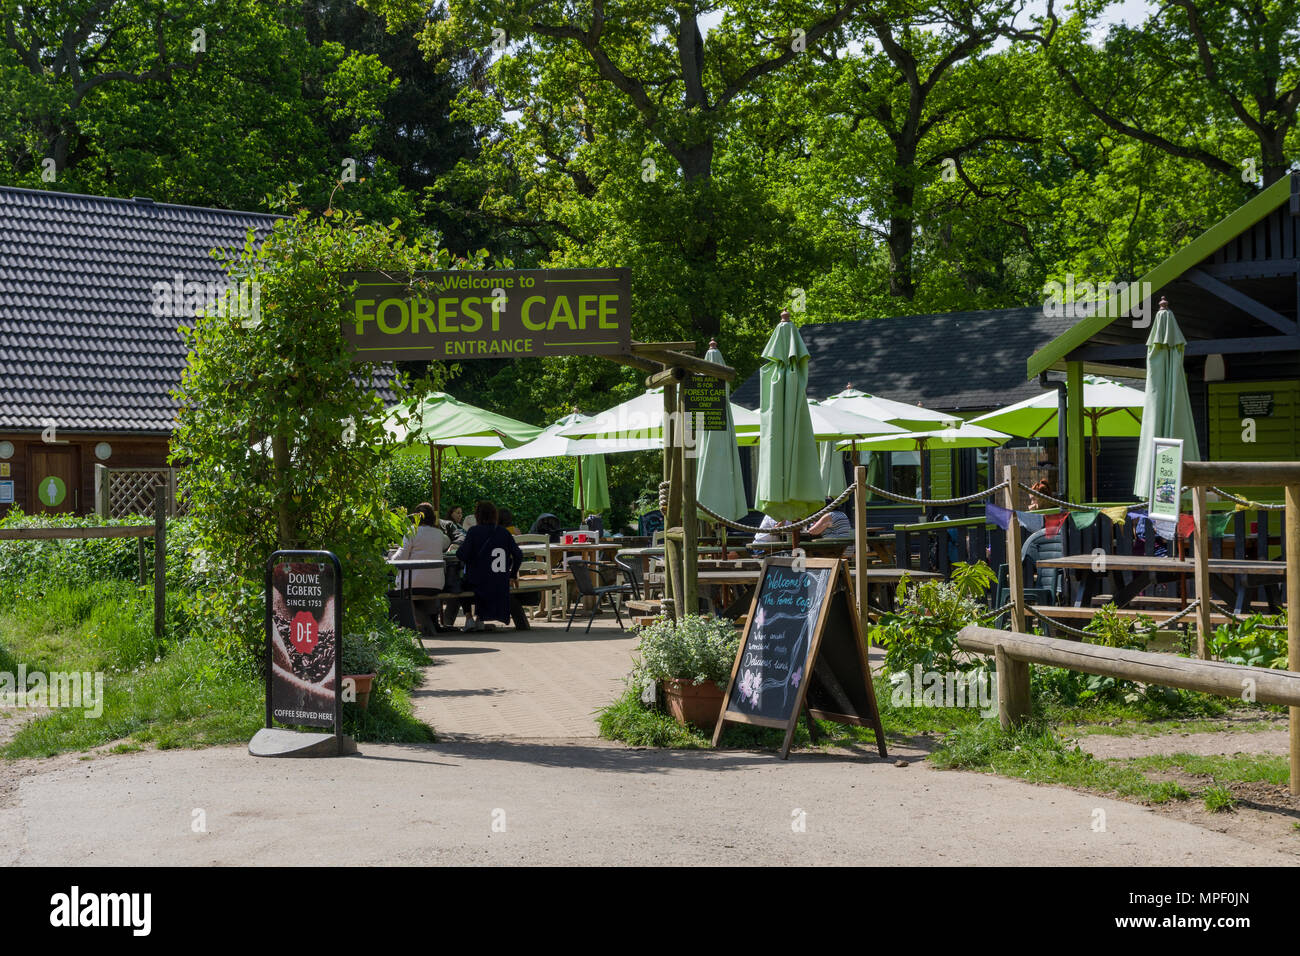 The Forest Café, a rustic café serving a variety of food, situated in the local beauty spot of Salcey Forest, Northamptonshire, UK Stock Photo